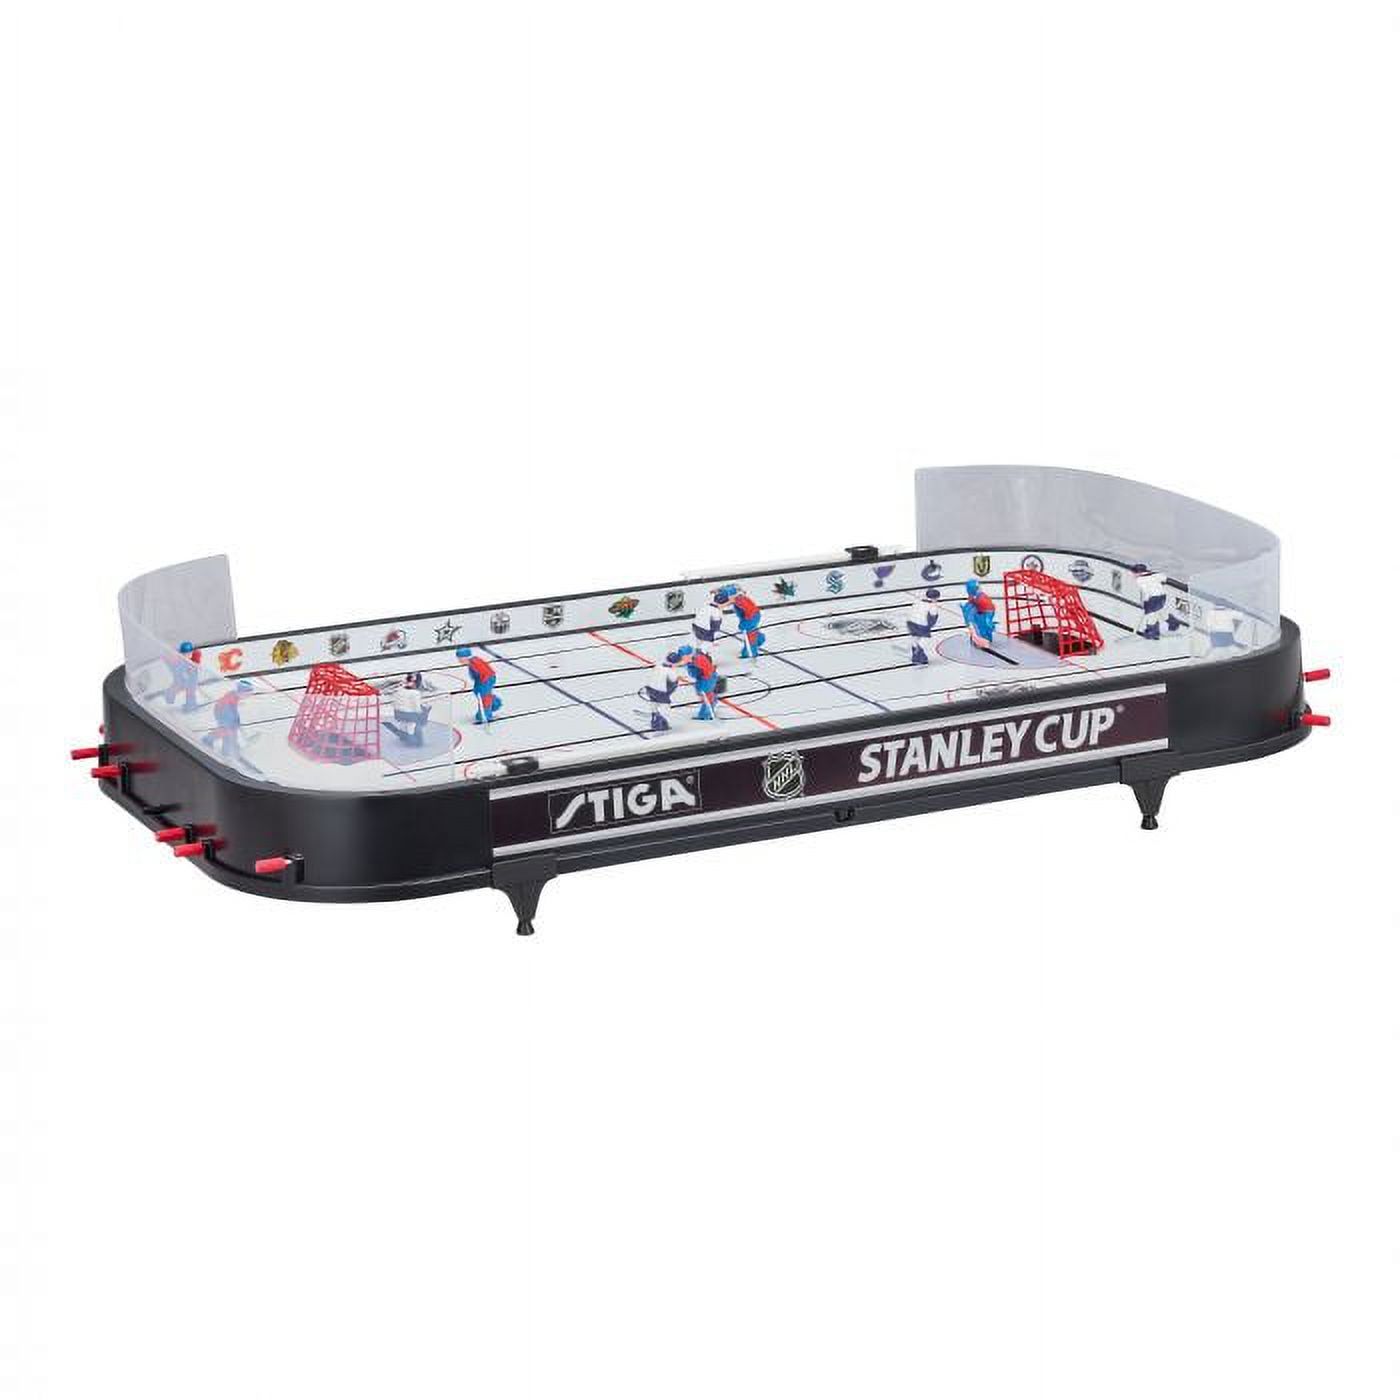 STIGA 3T NHL Stanley Cup Table Hockey Game - image 1 of 6